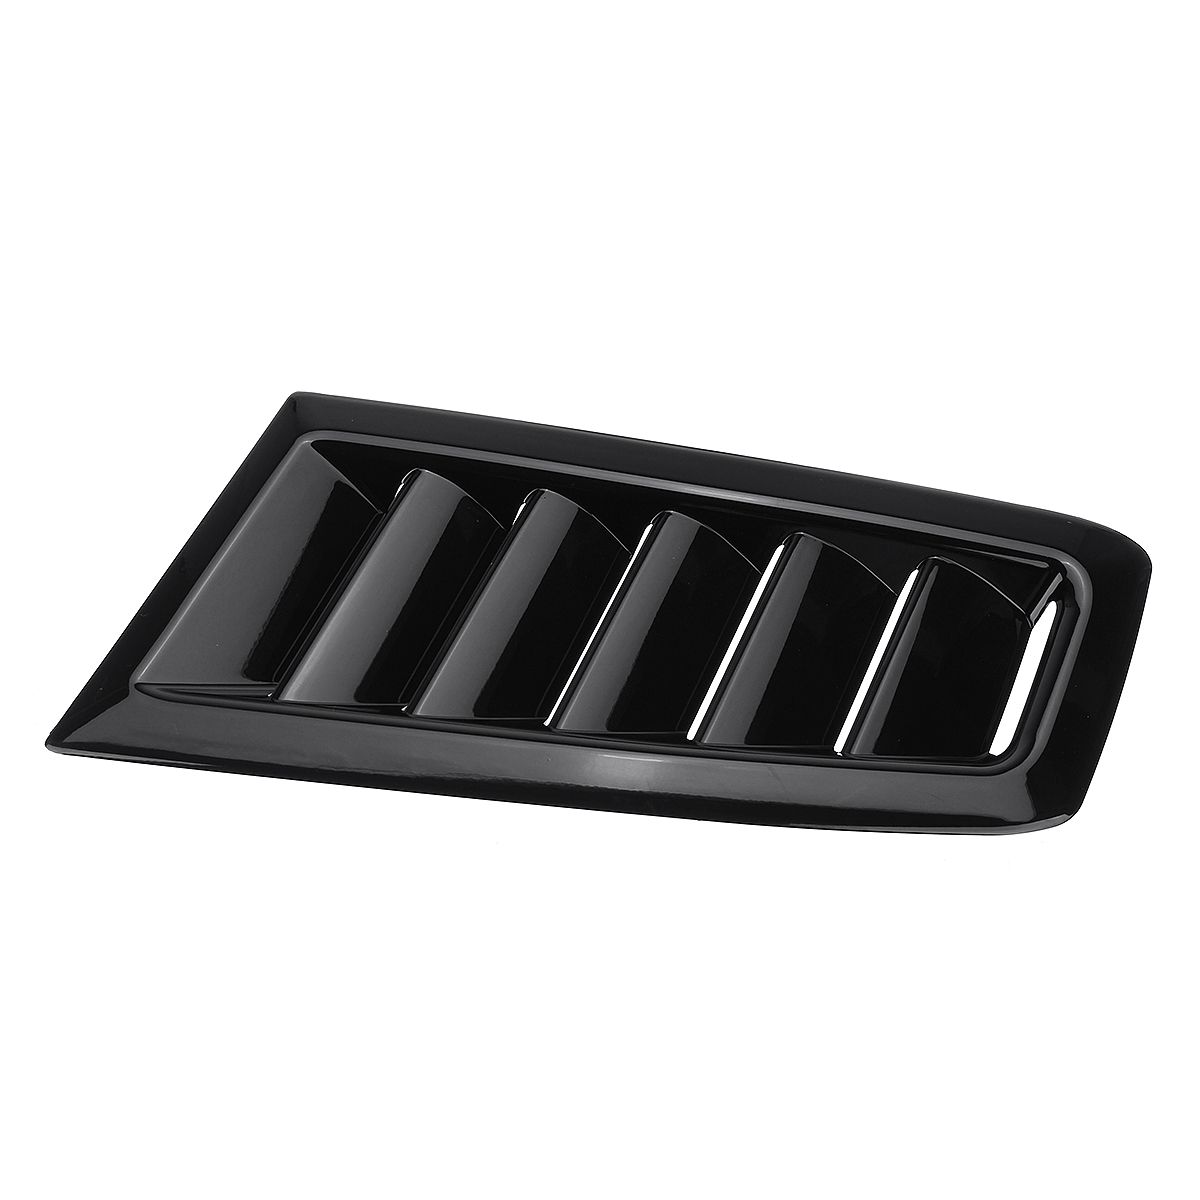 Car-RS-Style-Bonnet-Vents-Universal-Glossy-BlackFor-Ford-Focus-MK2-1673865